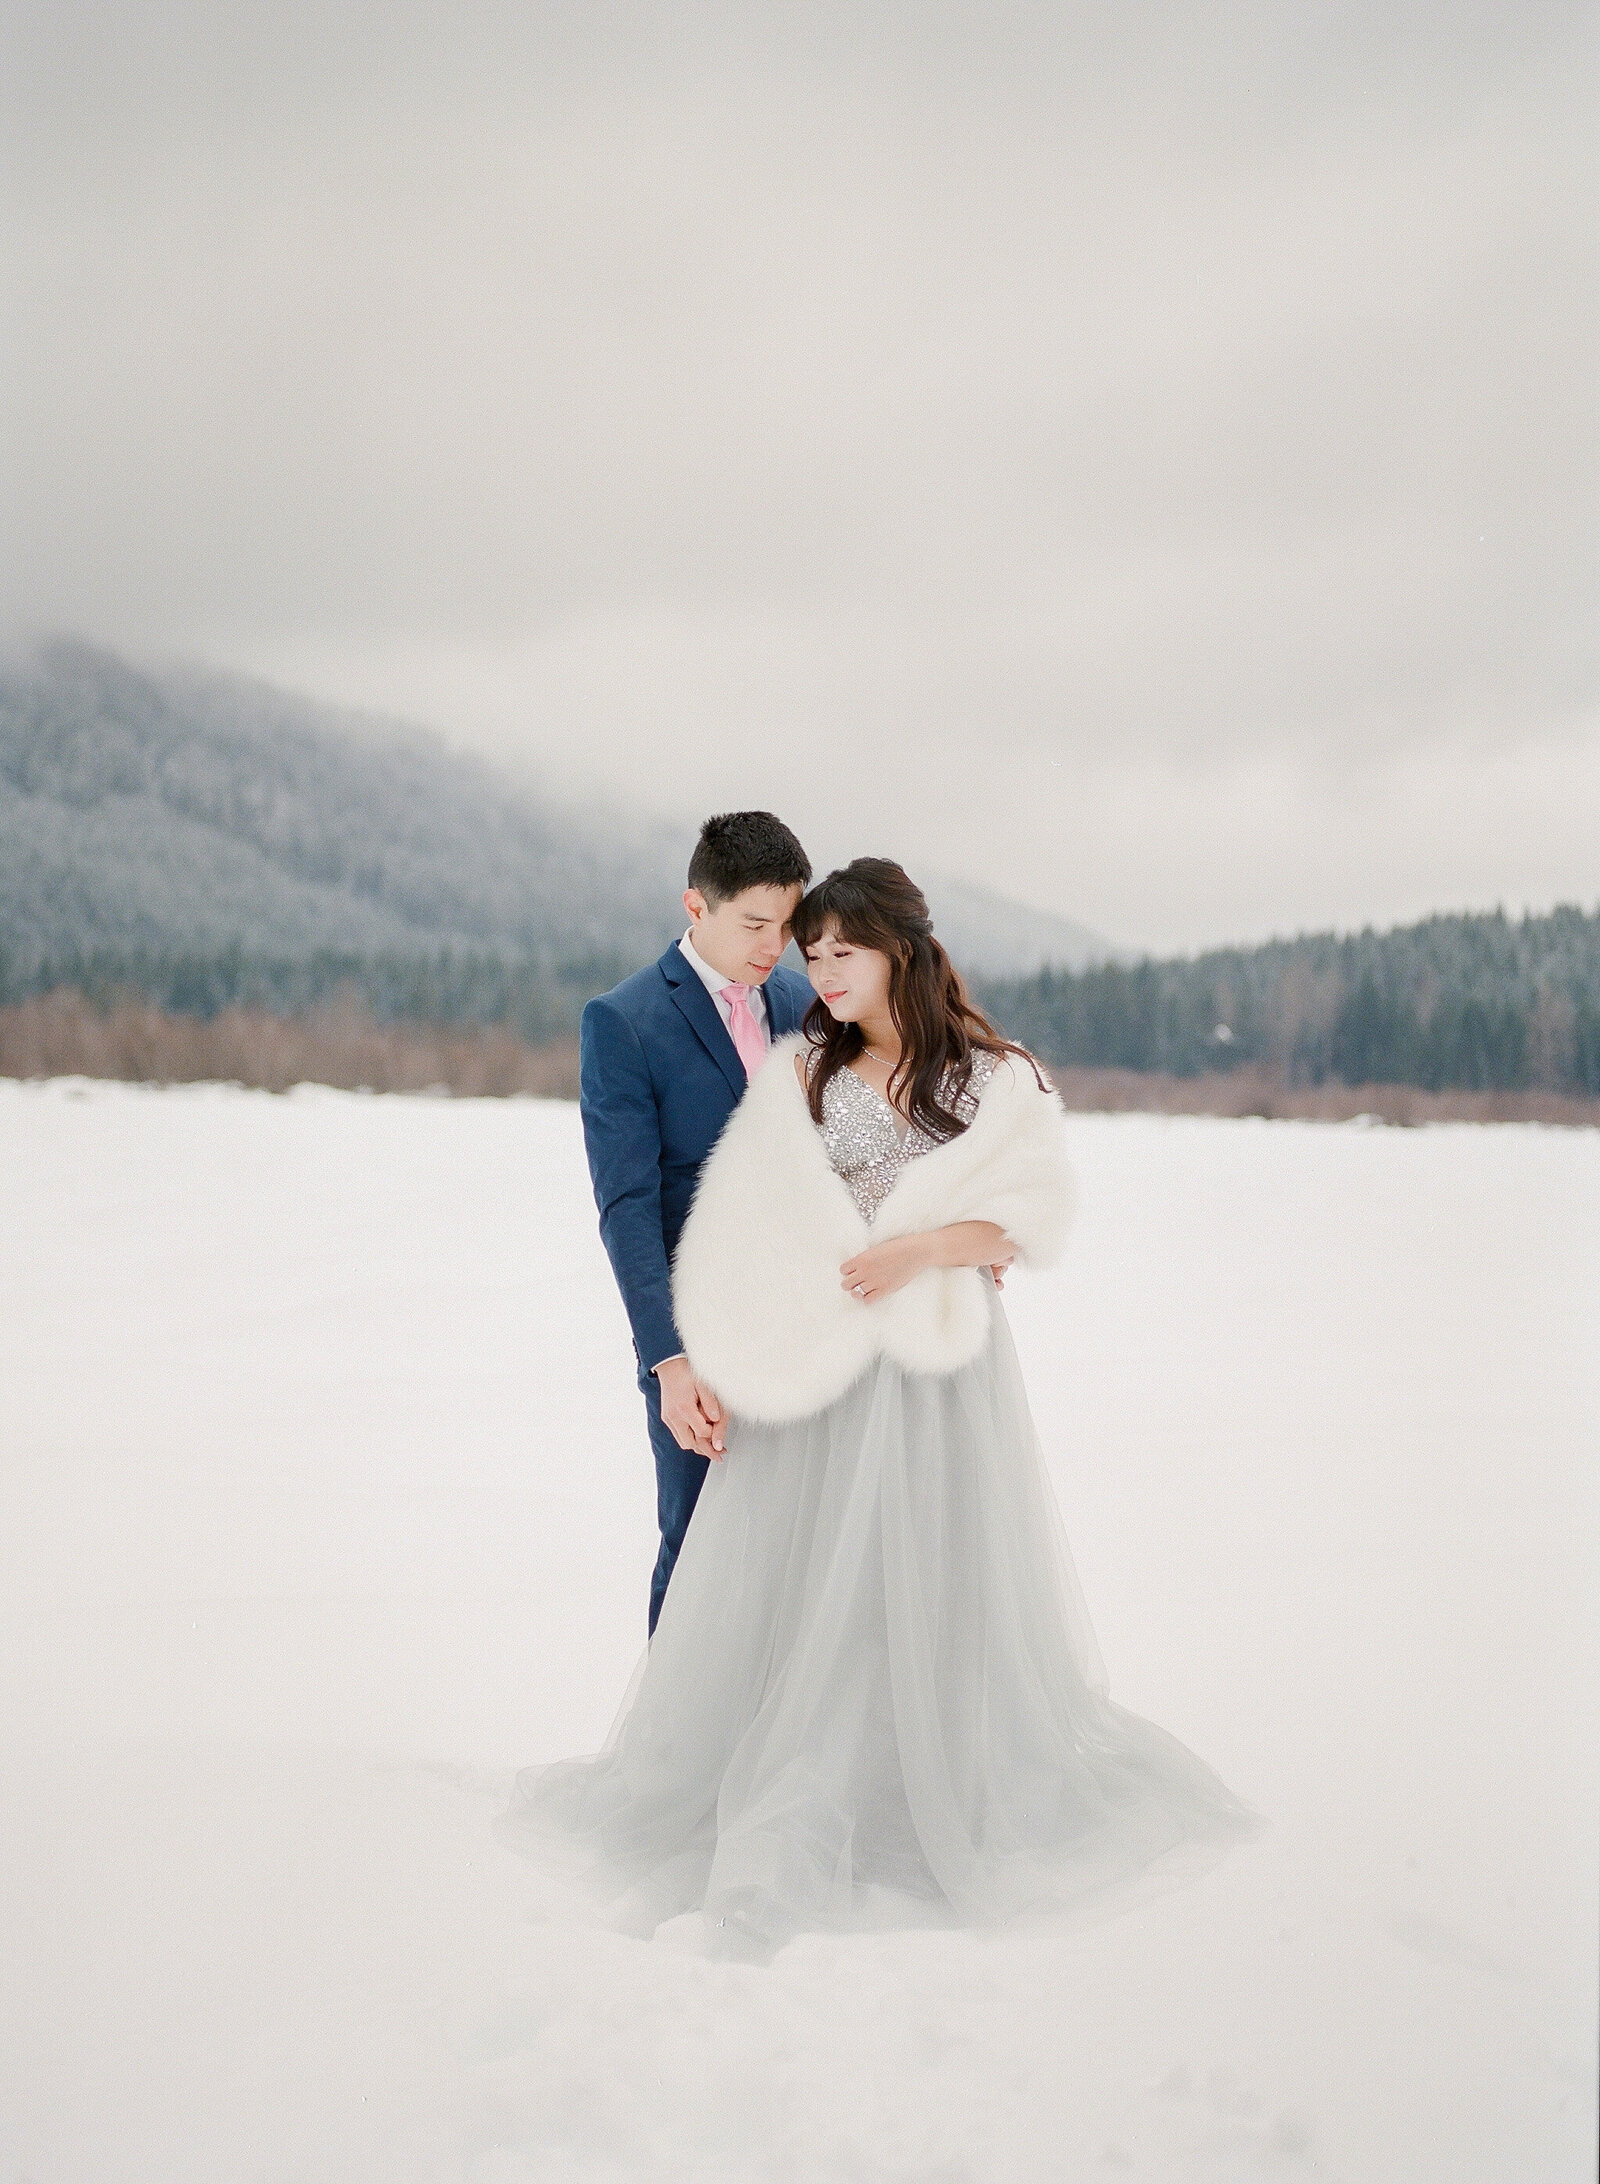 Annie and James Winter Session at Snoqualmie Pass - Kerry Jeanne Photography (177 of 178)